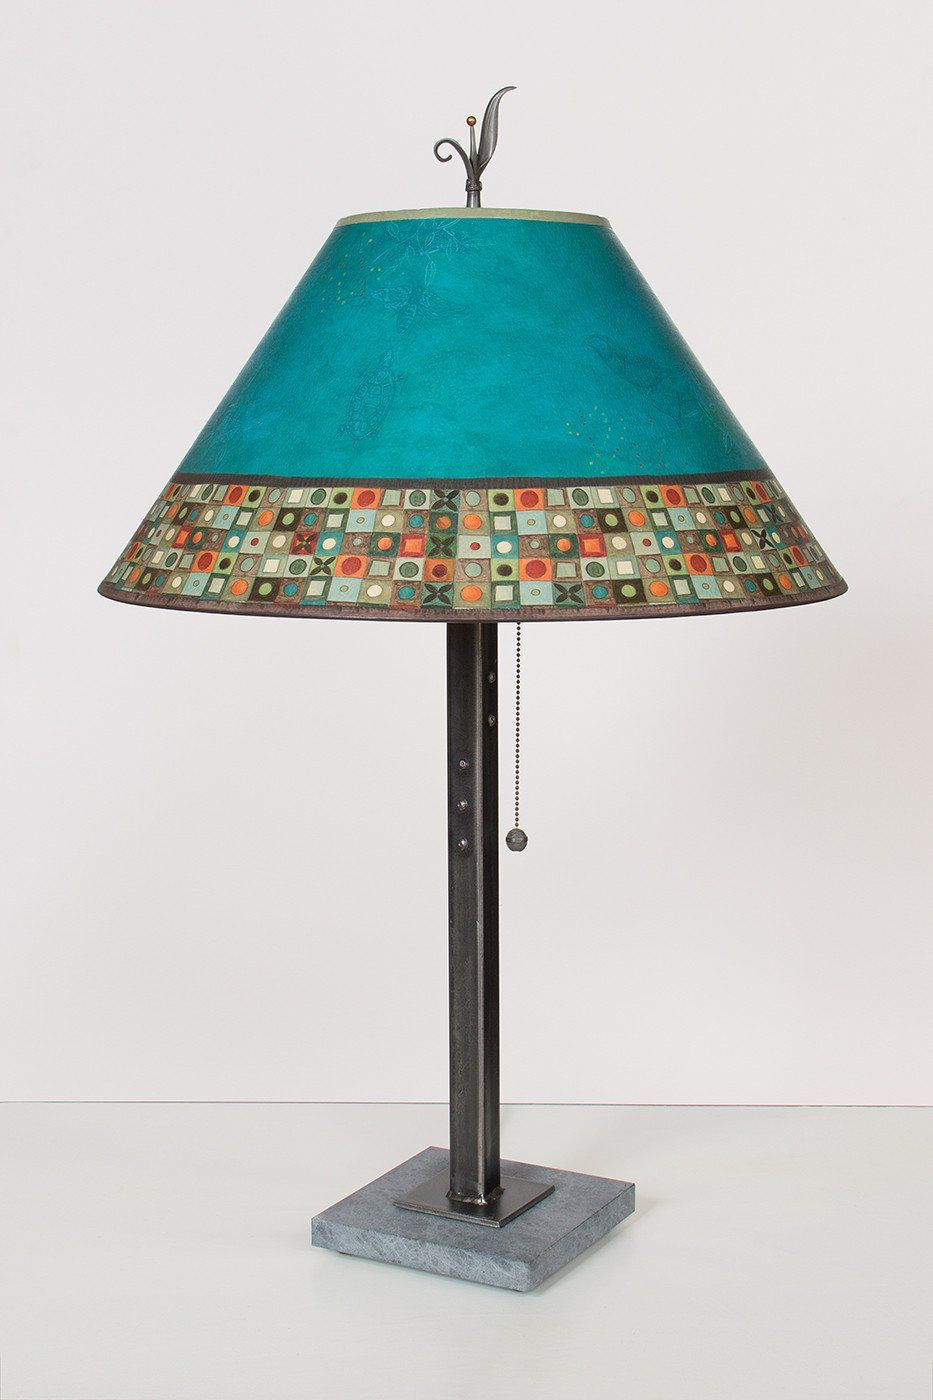 Janna Ugone & Co Table Lamps Steel Table Lamp with Large Conical Shade in Jade Mosaic